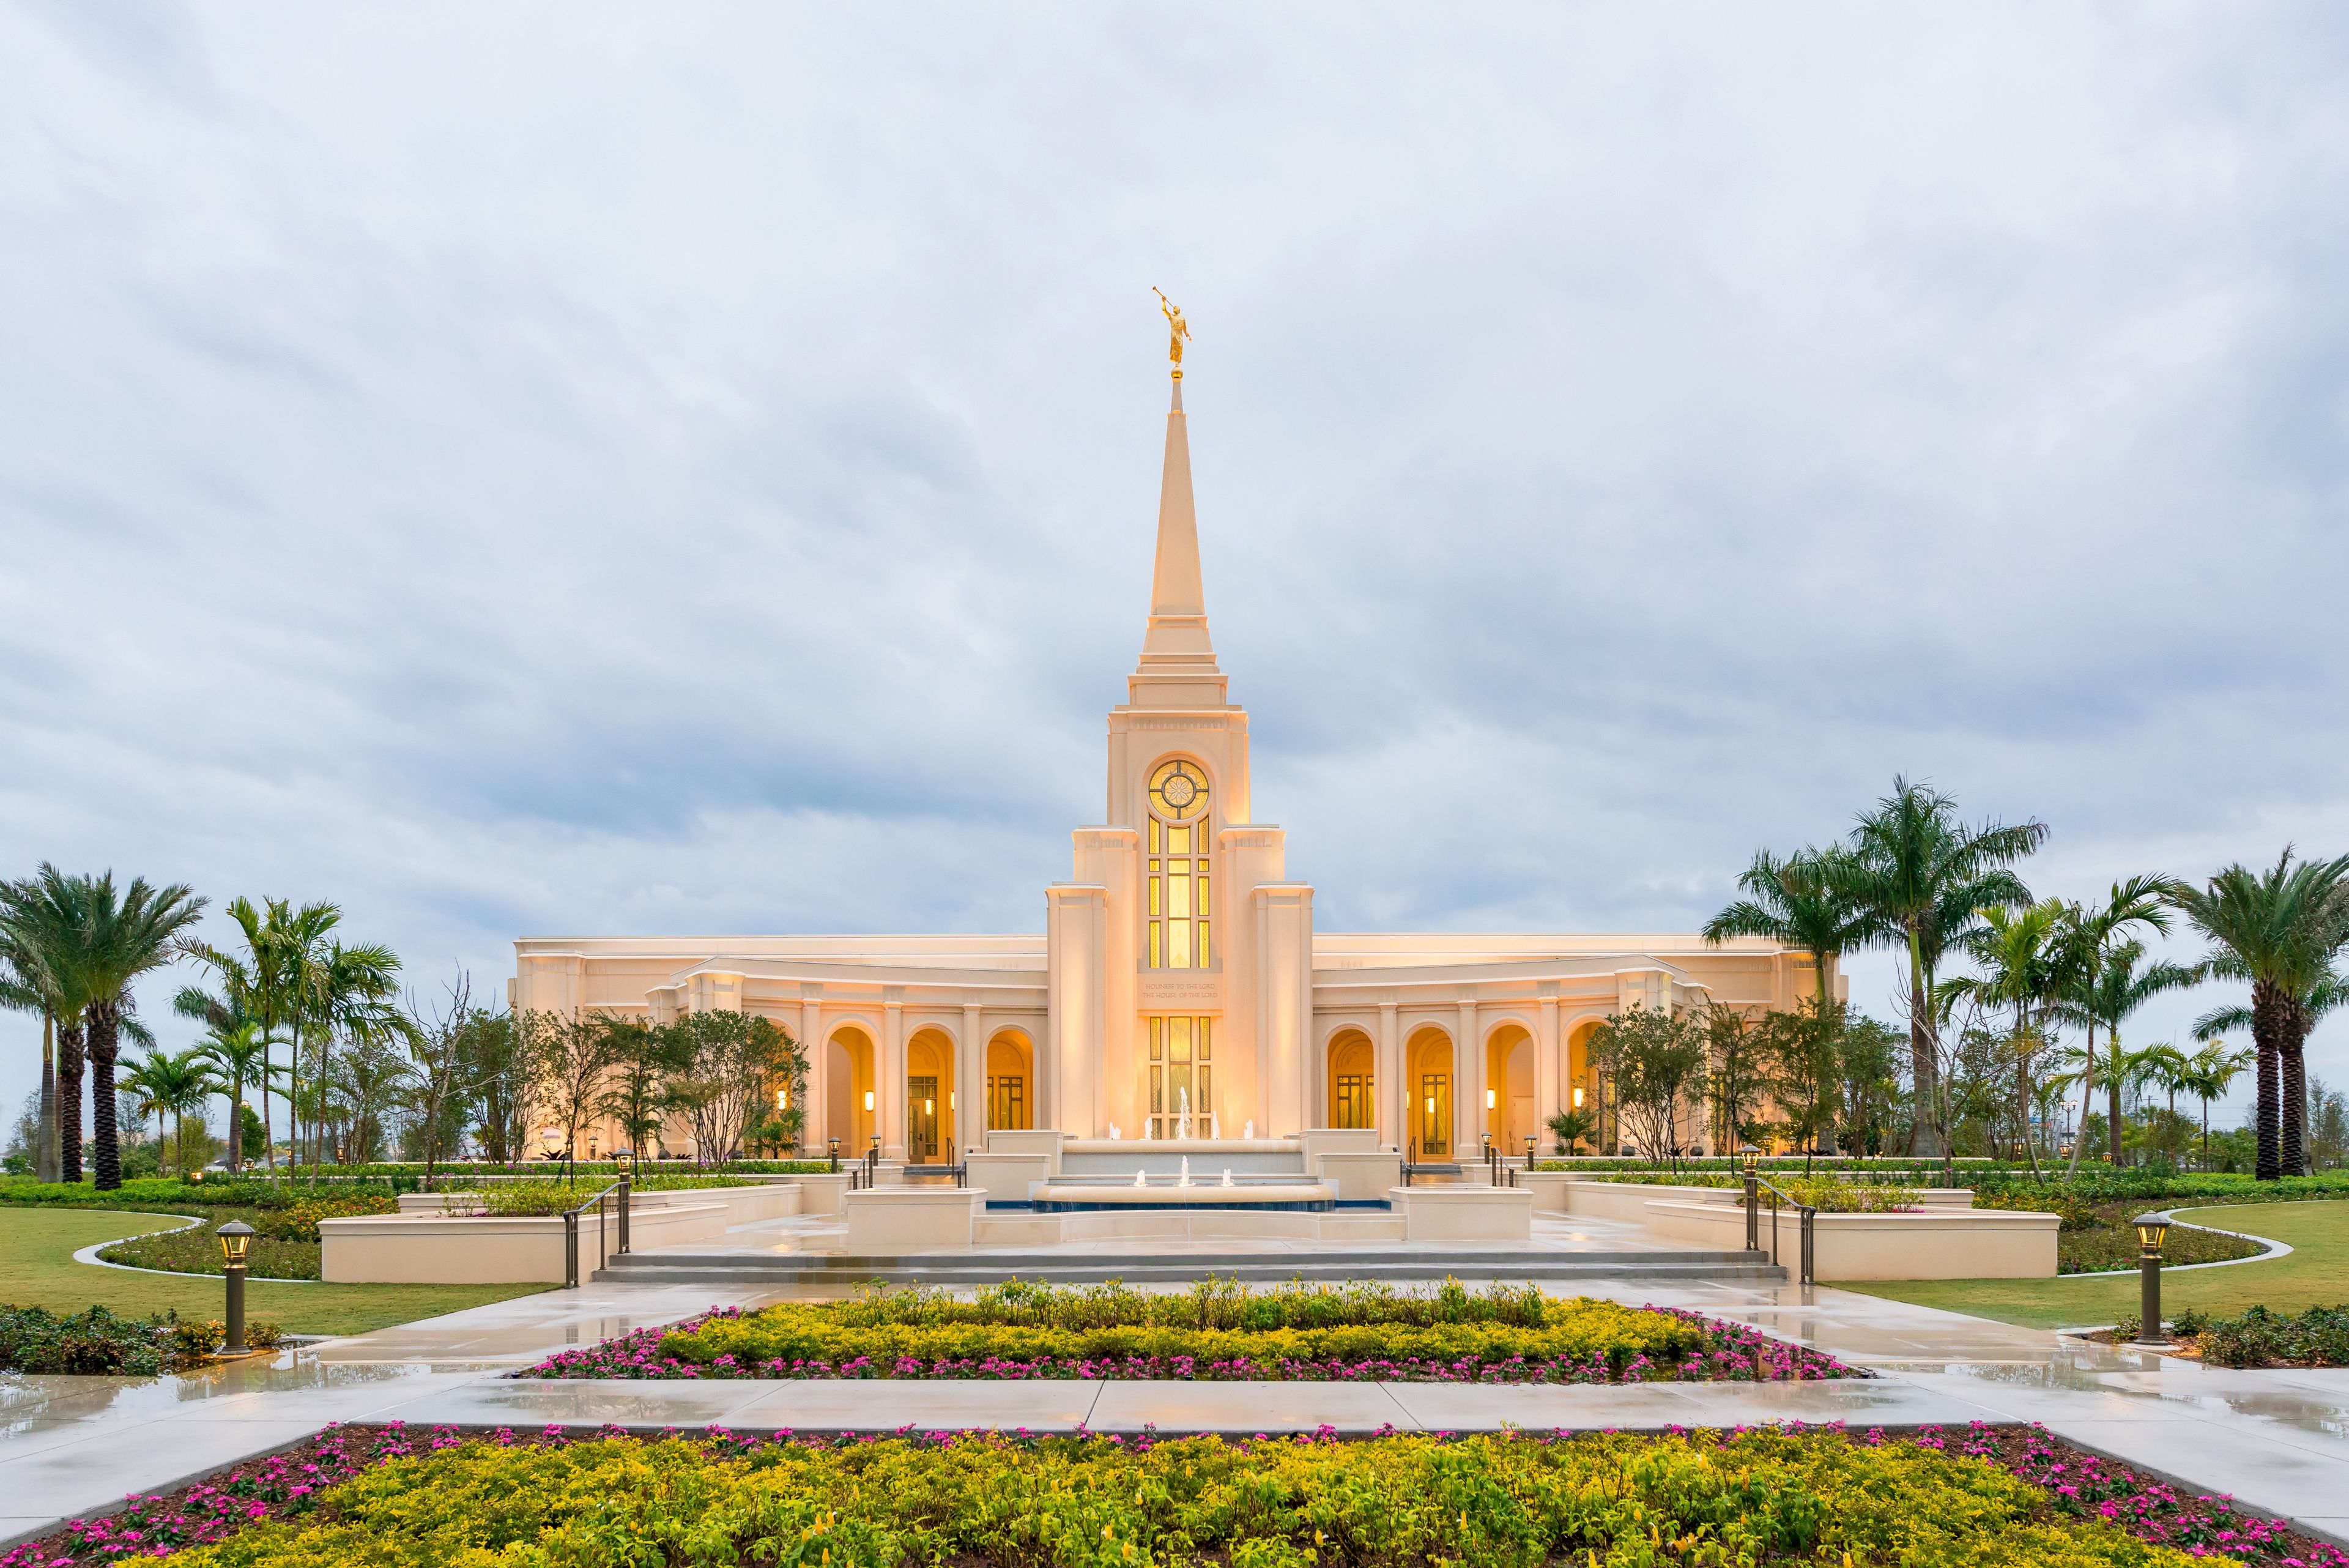 An exterior view of the Fort Lauderdale Florida Temple in the early evening.